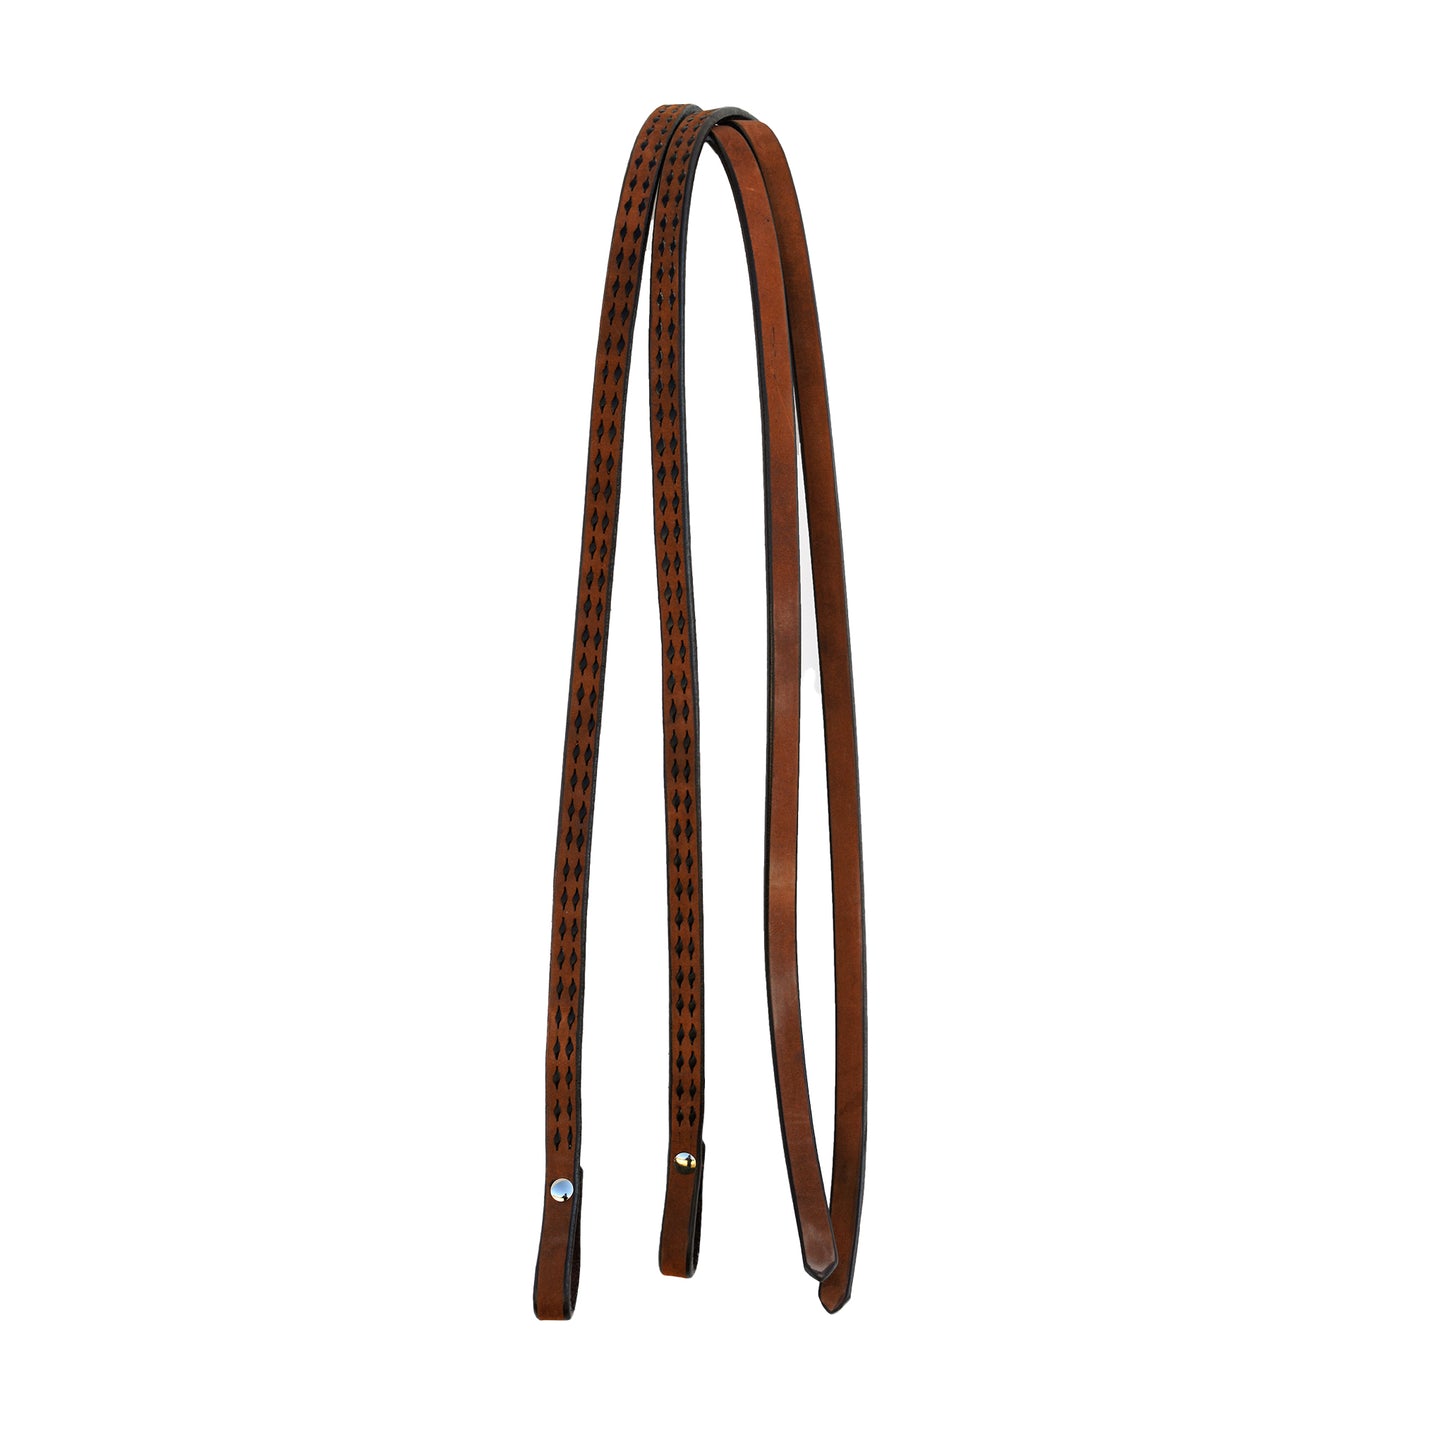 5/8" Split reins rough out chocolate leather with black buckstitch.